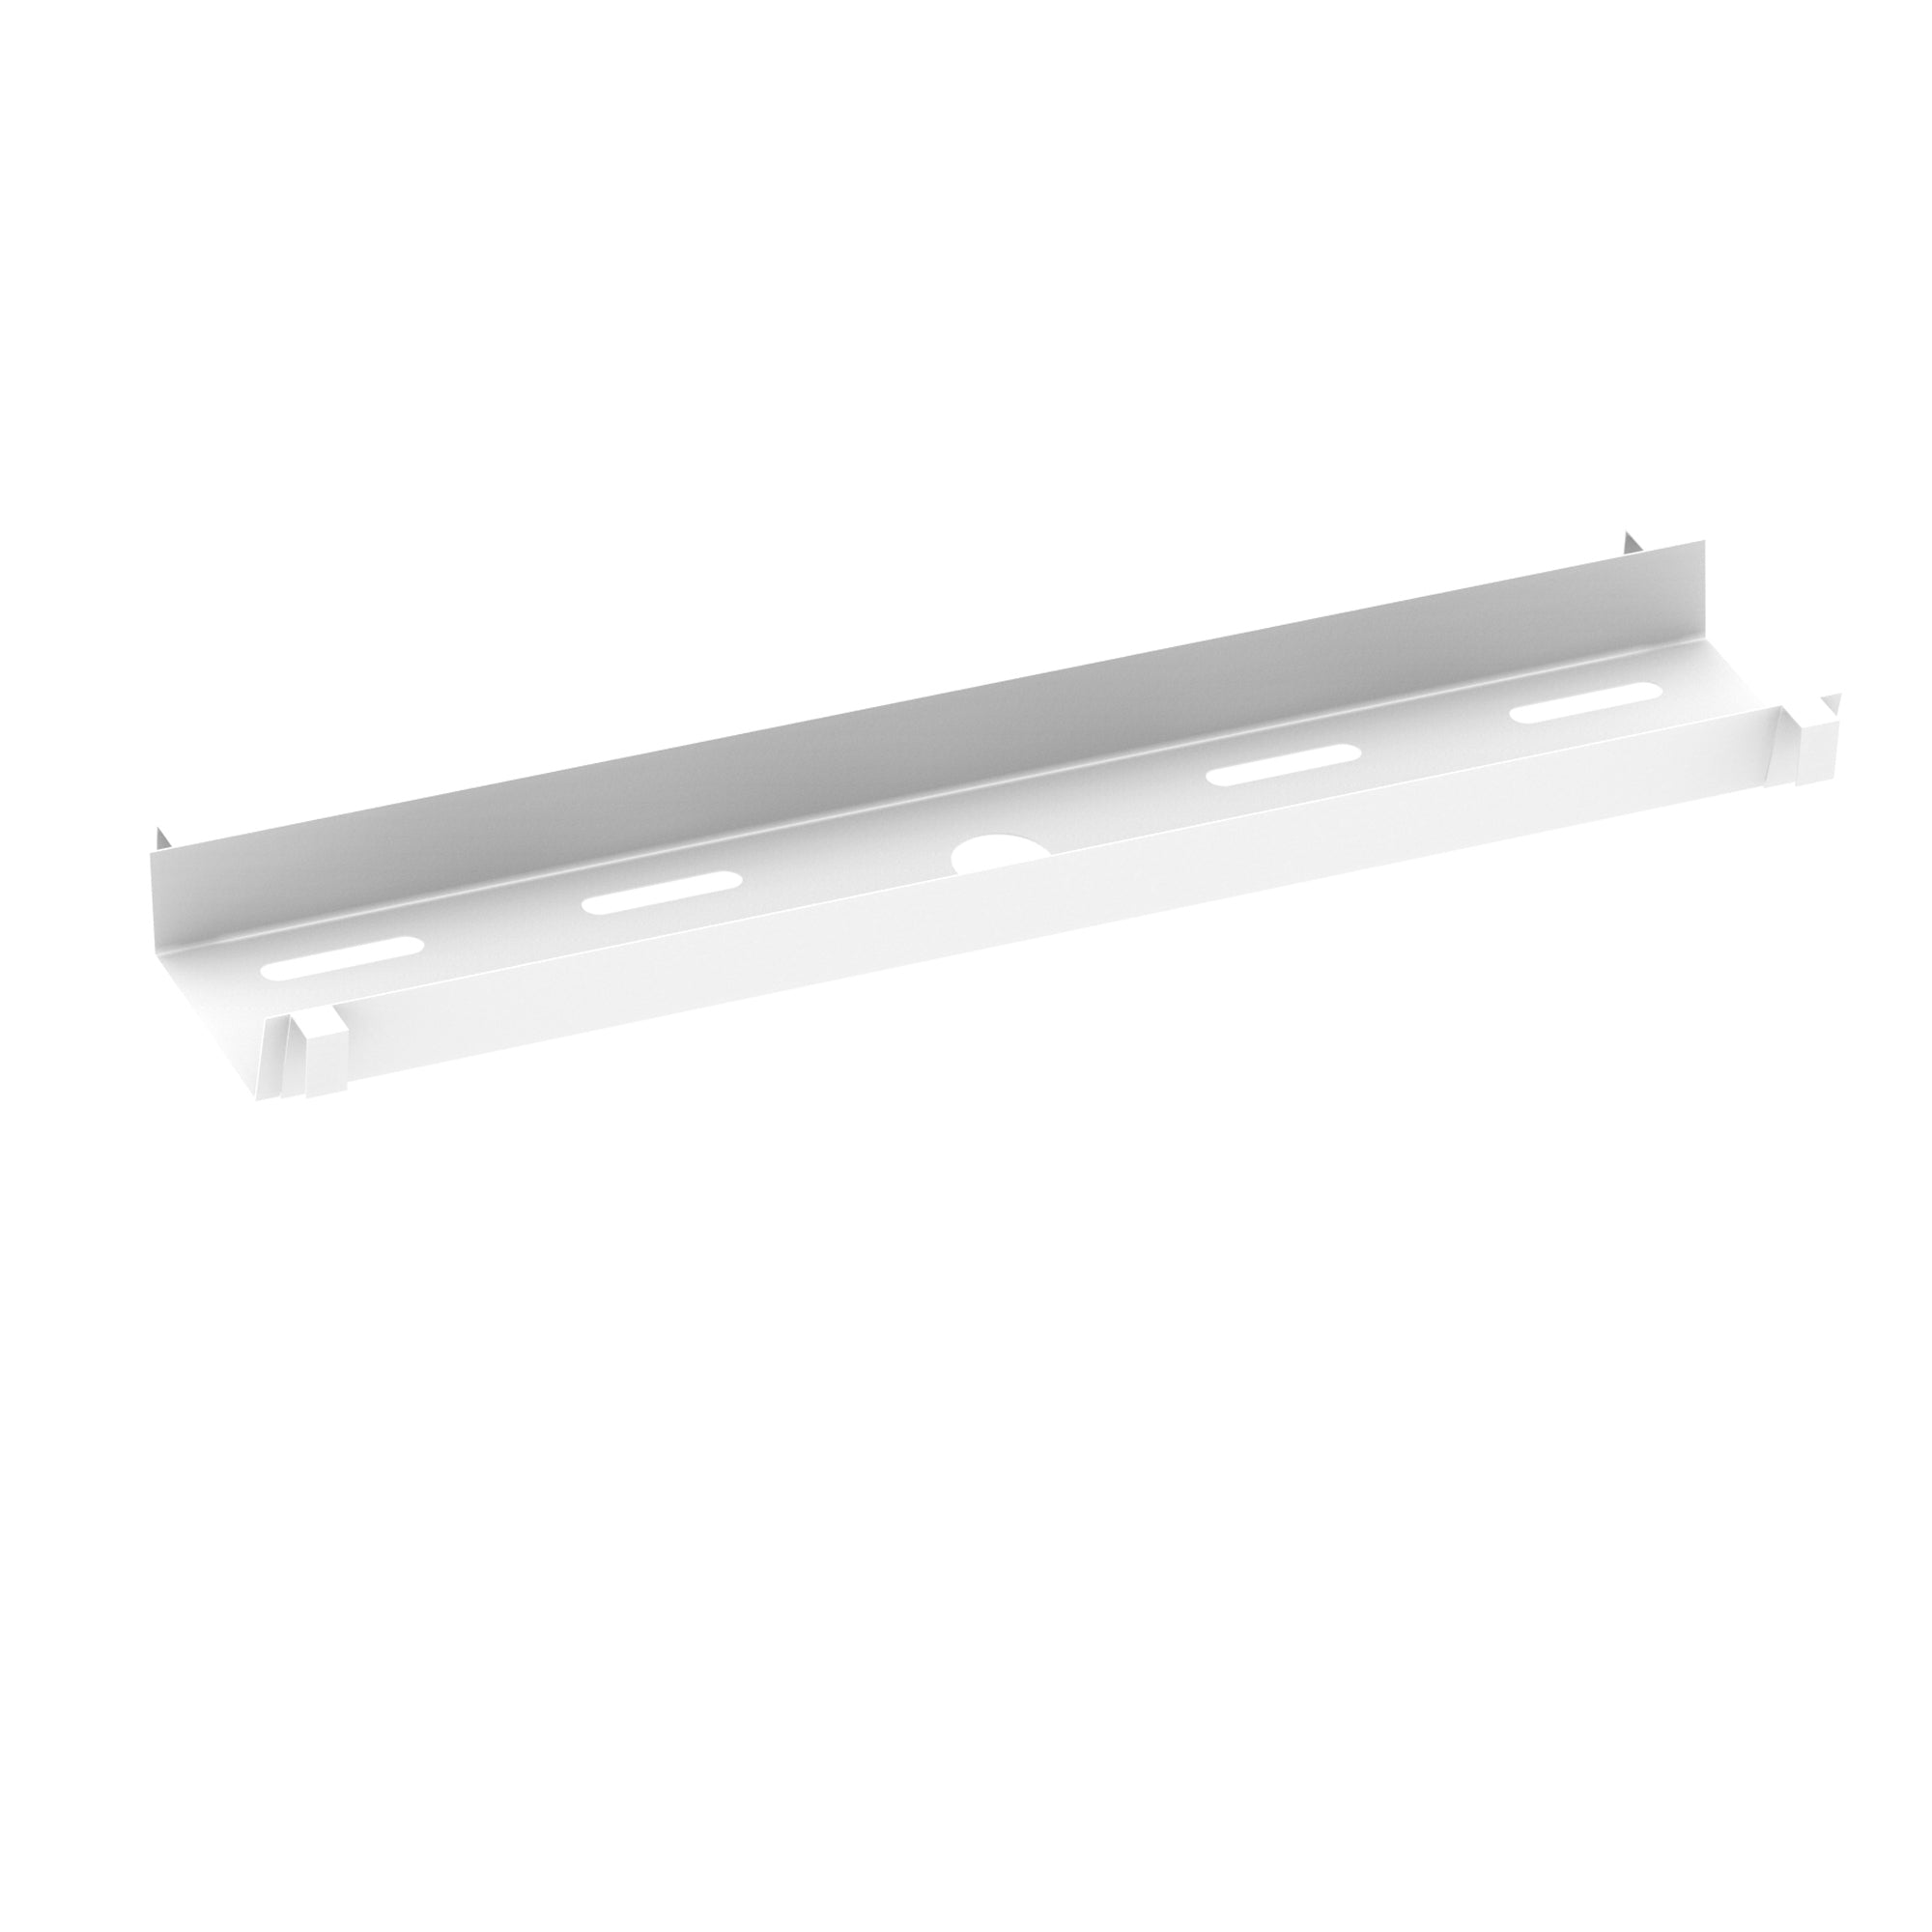 Oslo Steel Cable Management Tray - 1000x235x65mm, Rectangular, Self-Assembly, 5-Year Guarantee